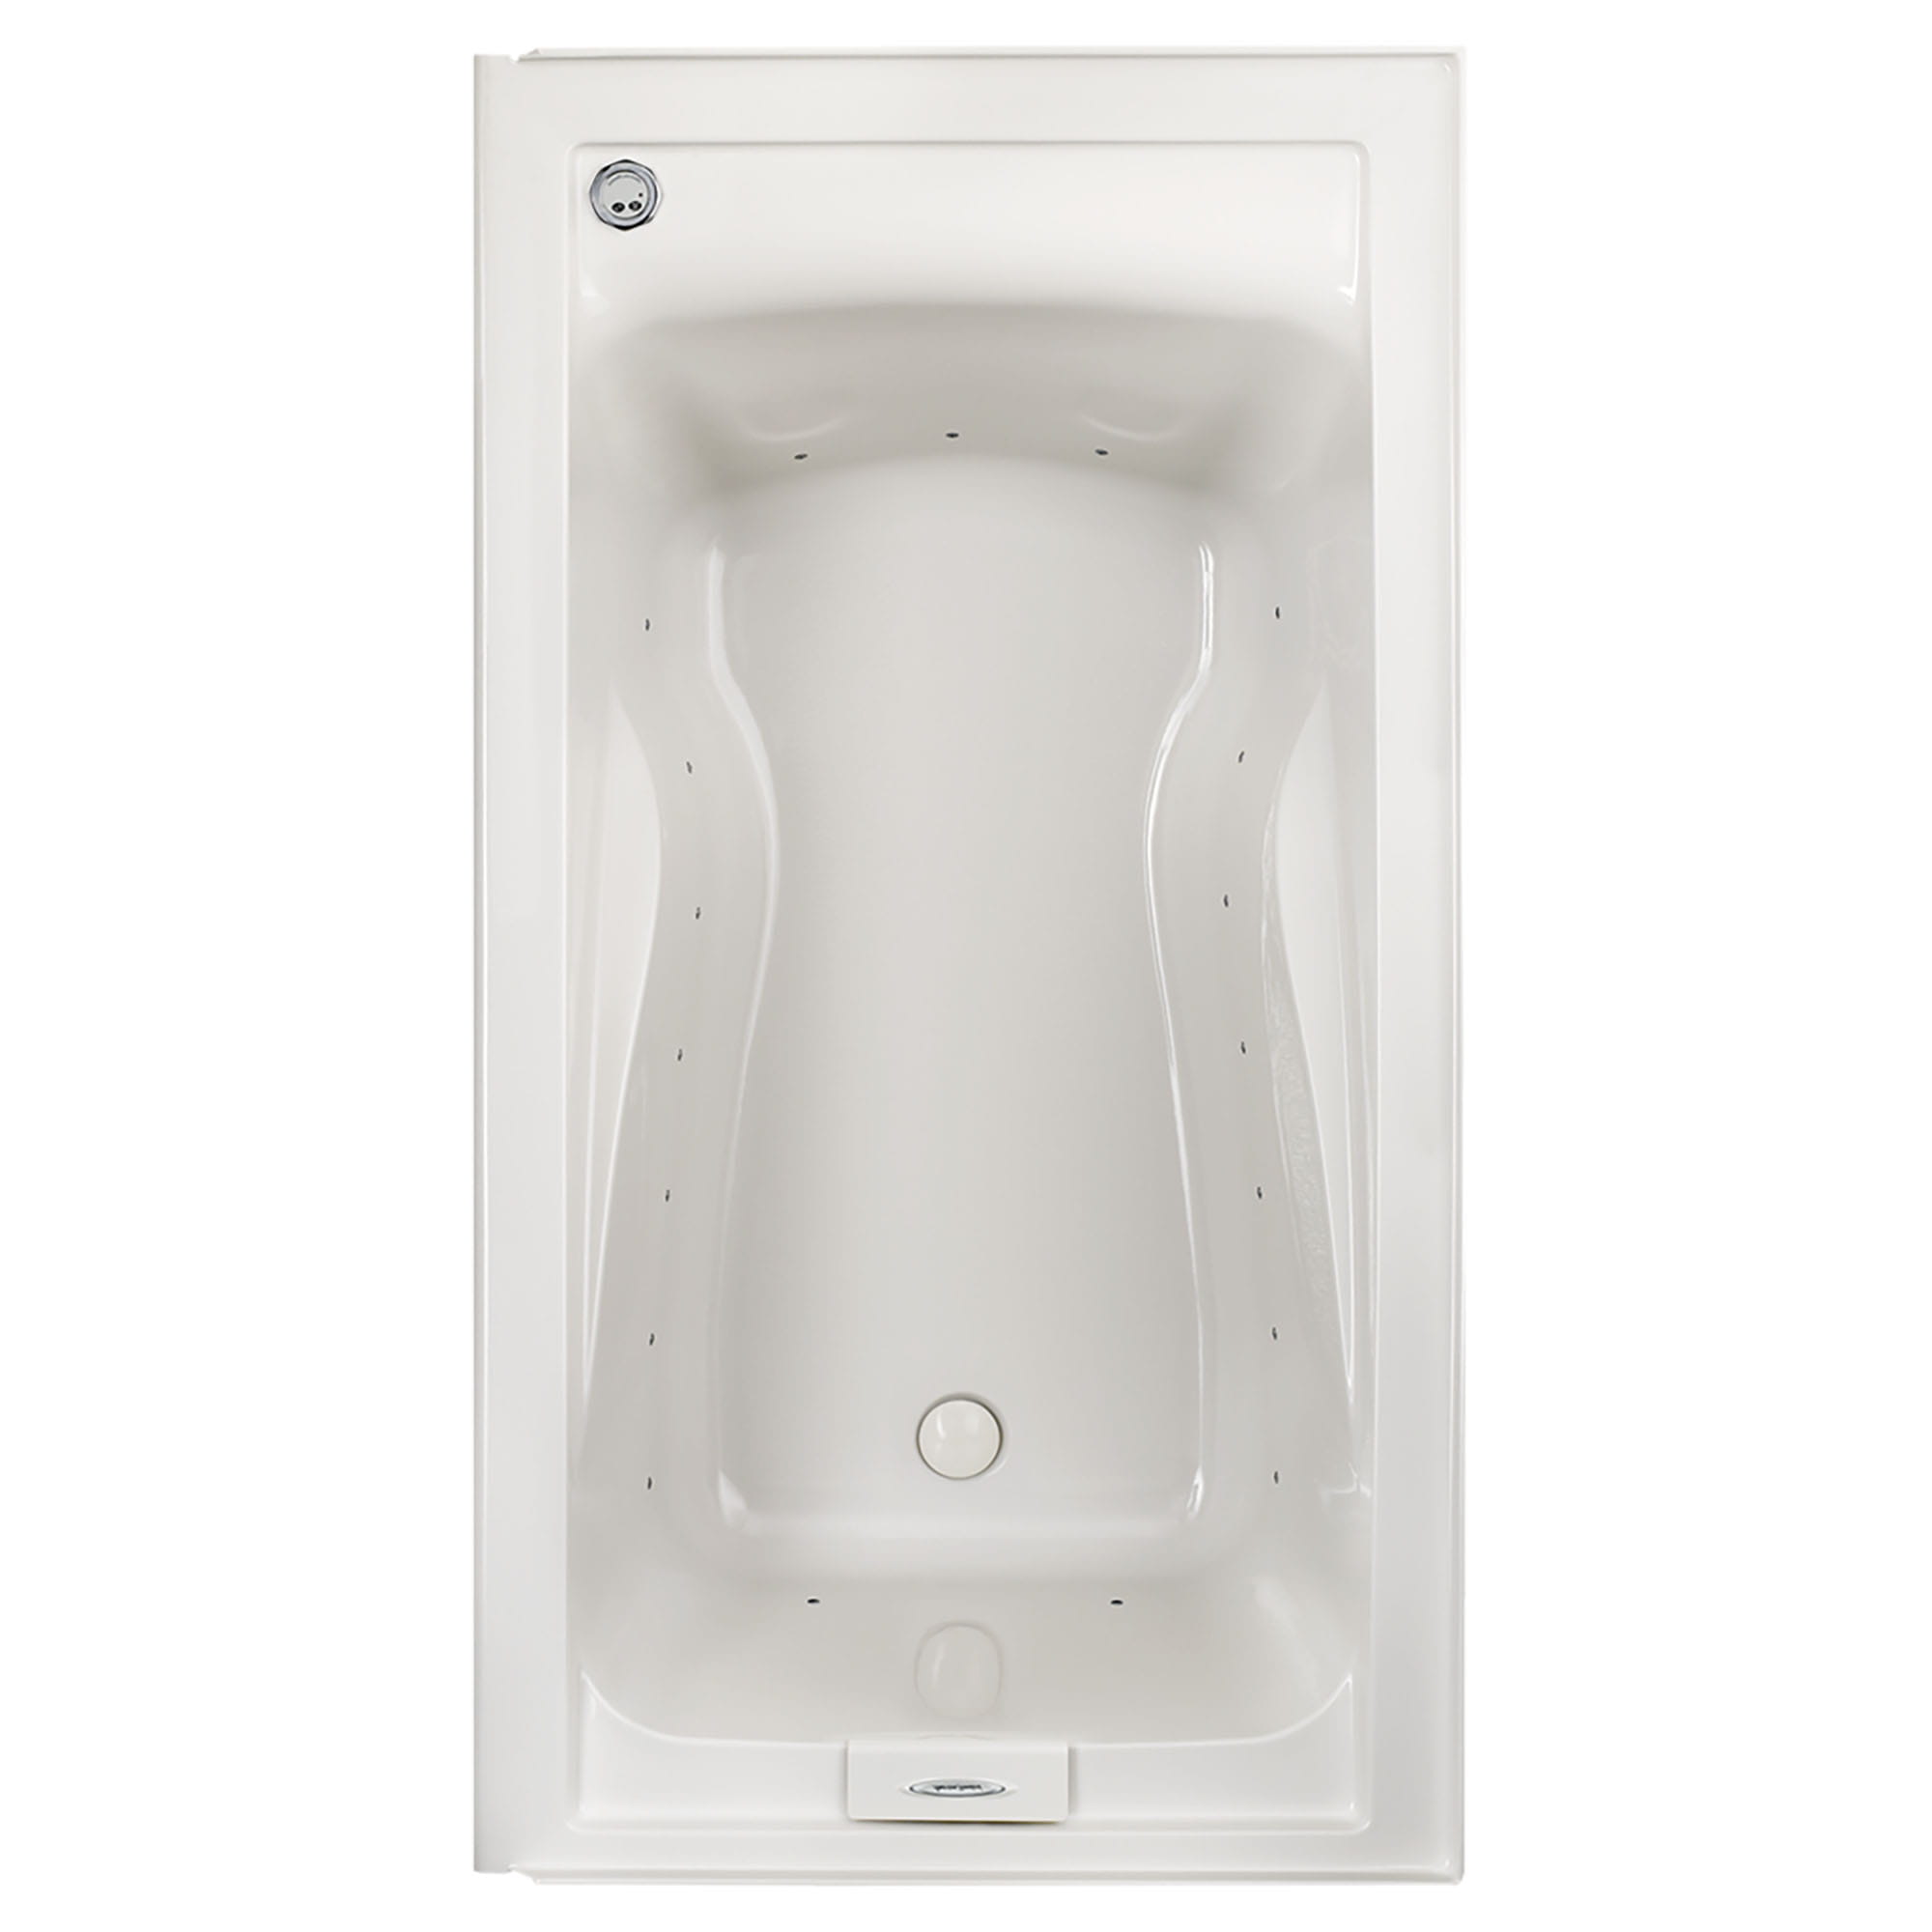 Evolution 60 x 32 Inch Deep Soak Integral Apron Bathtub Left Hand Outlet With EverClean Combination Spa System WHITE